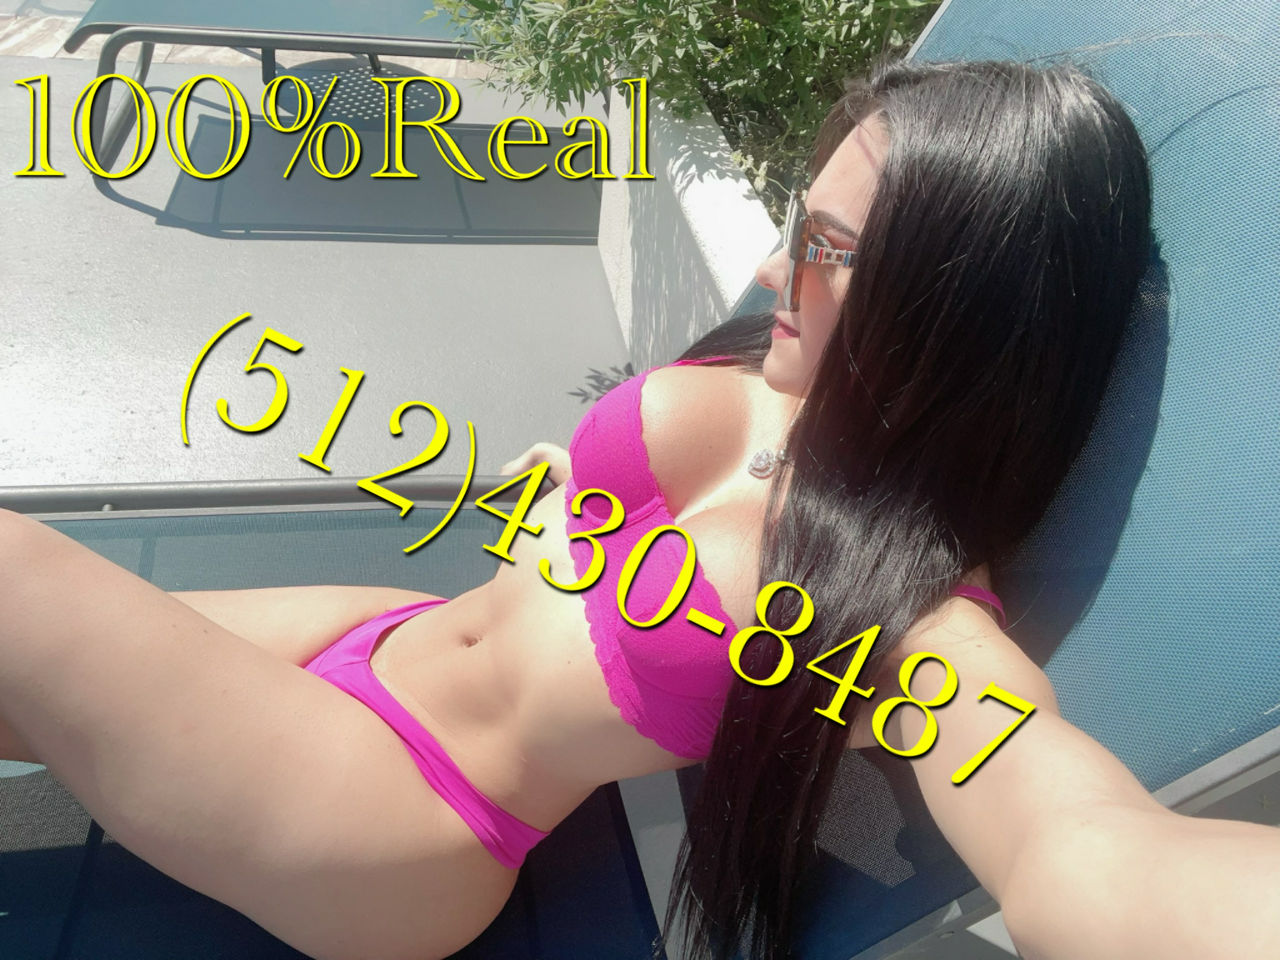 Escorts Parsippany, New Jersey last day here